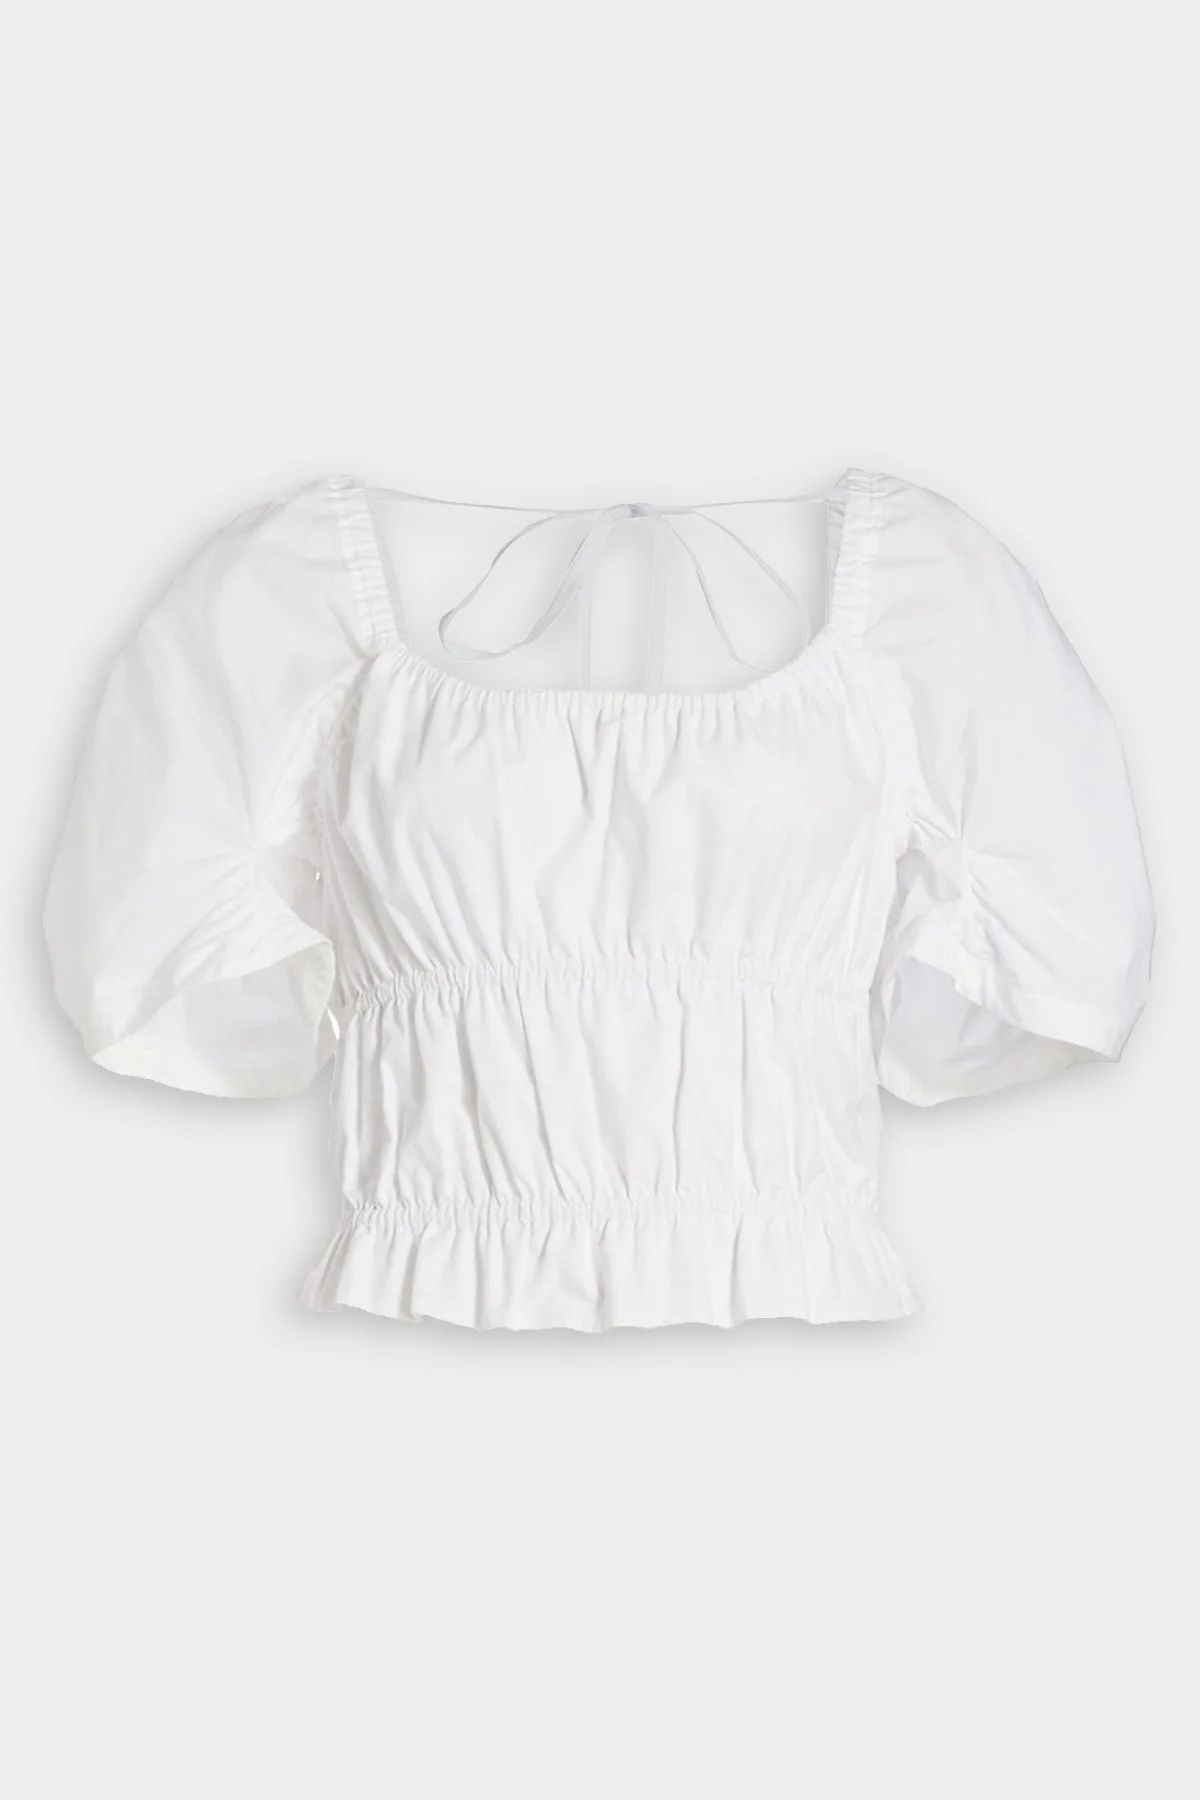 Elora Puff Sleeve Smocked Top in White | Shop Olivia